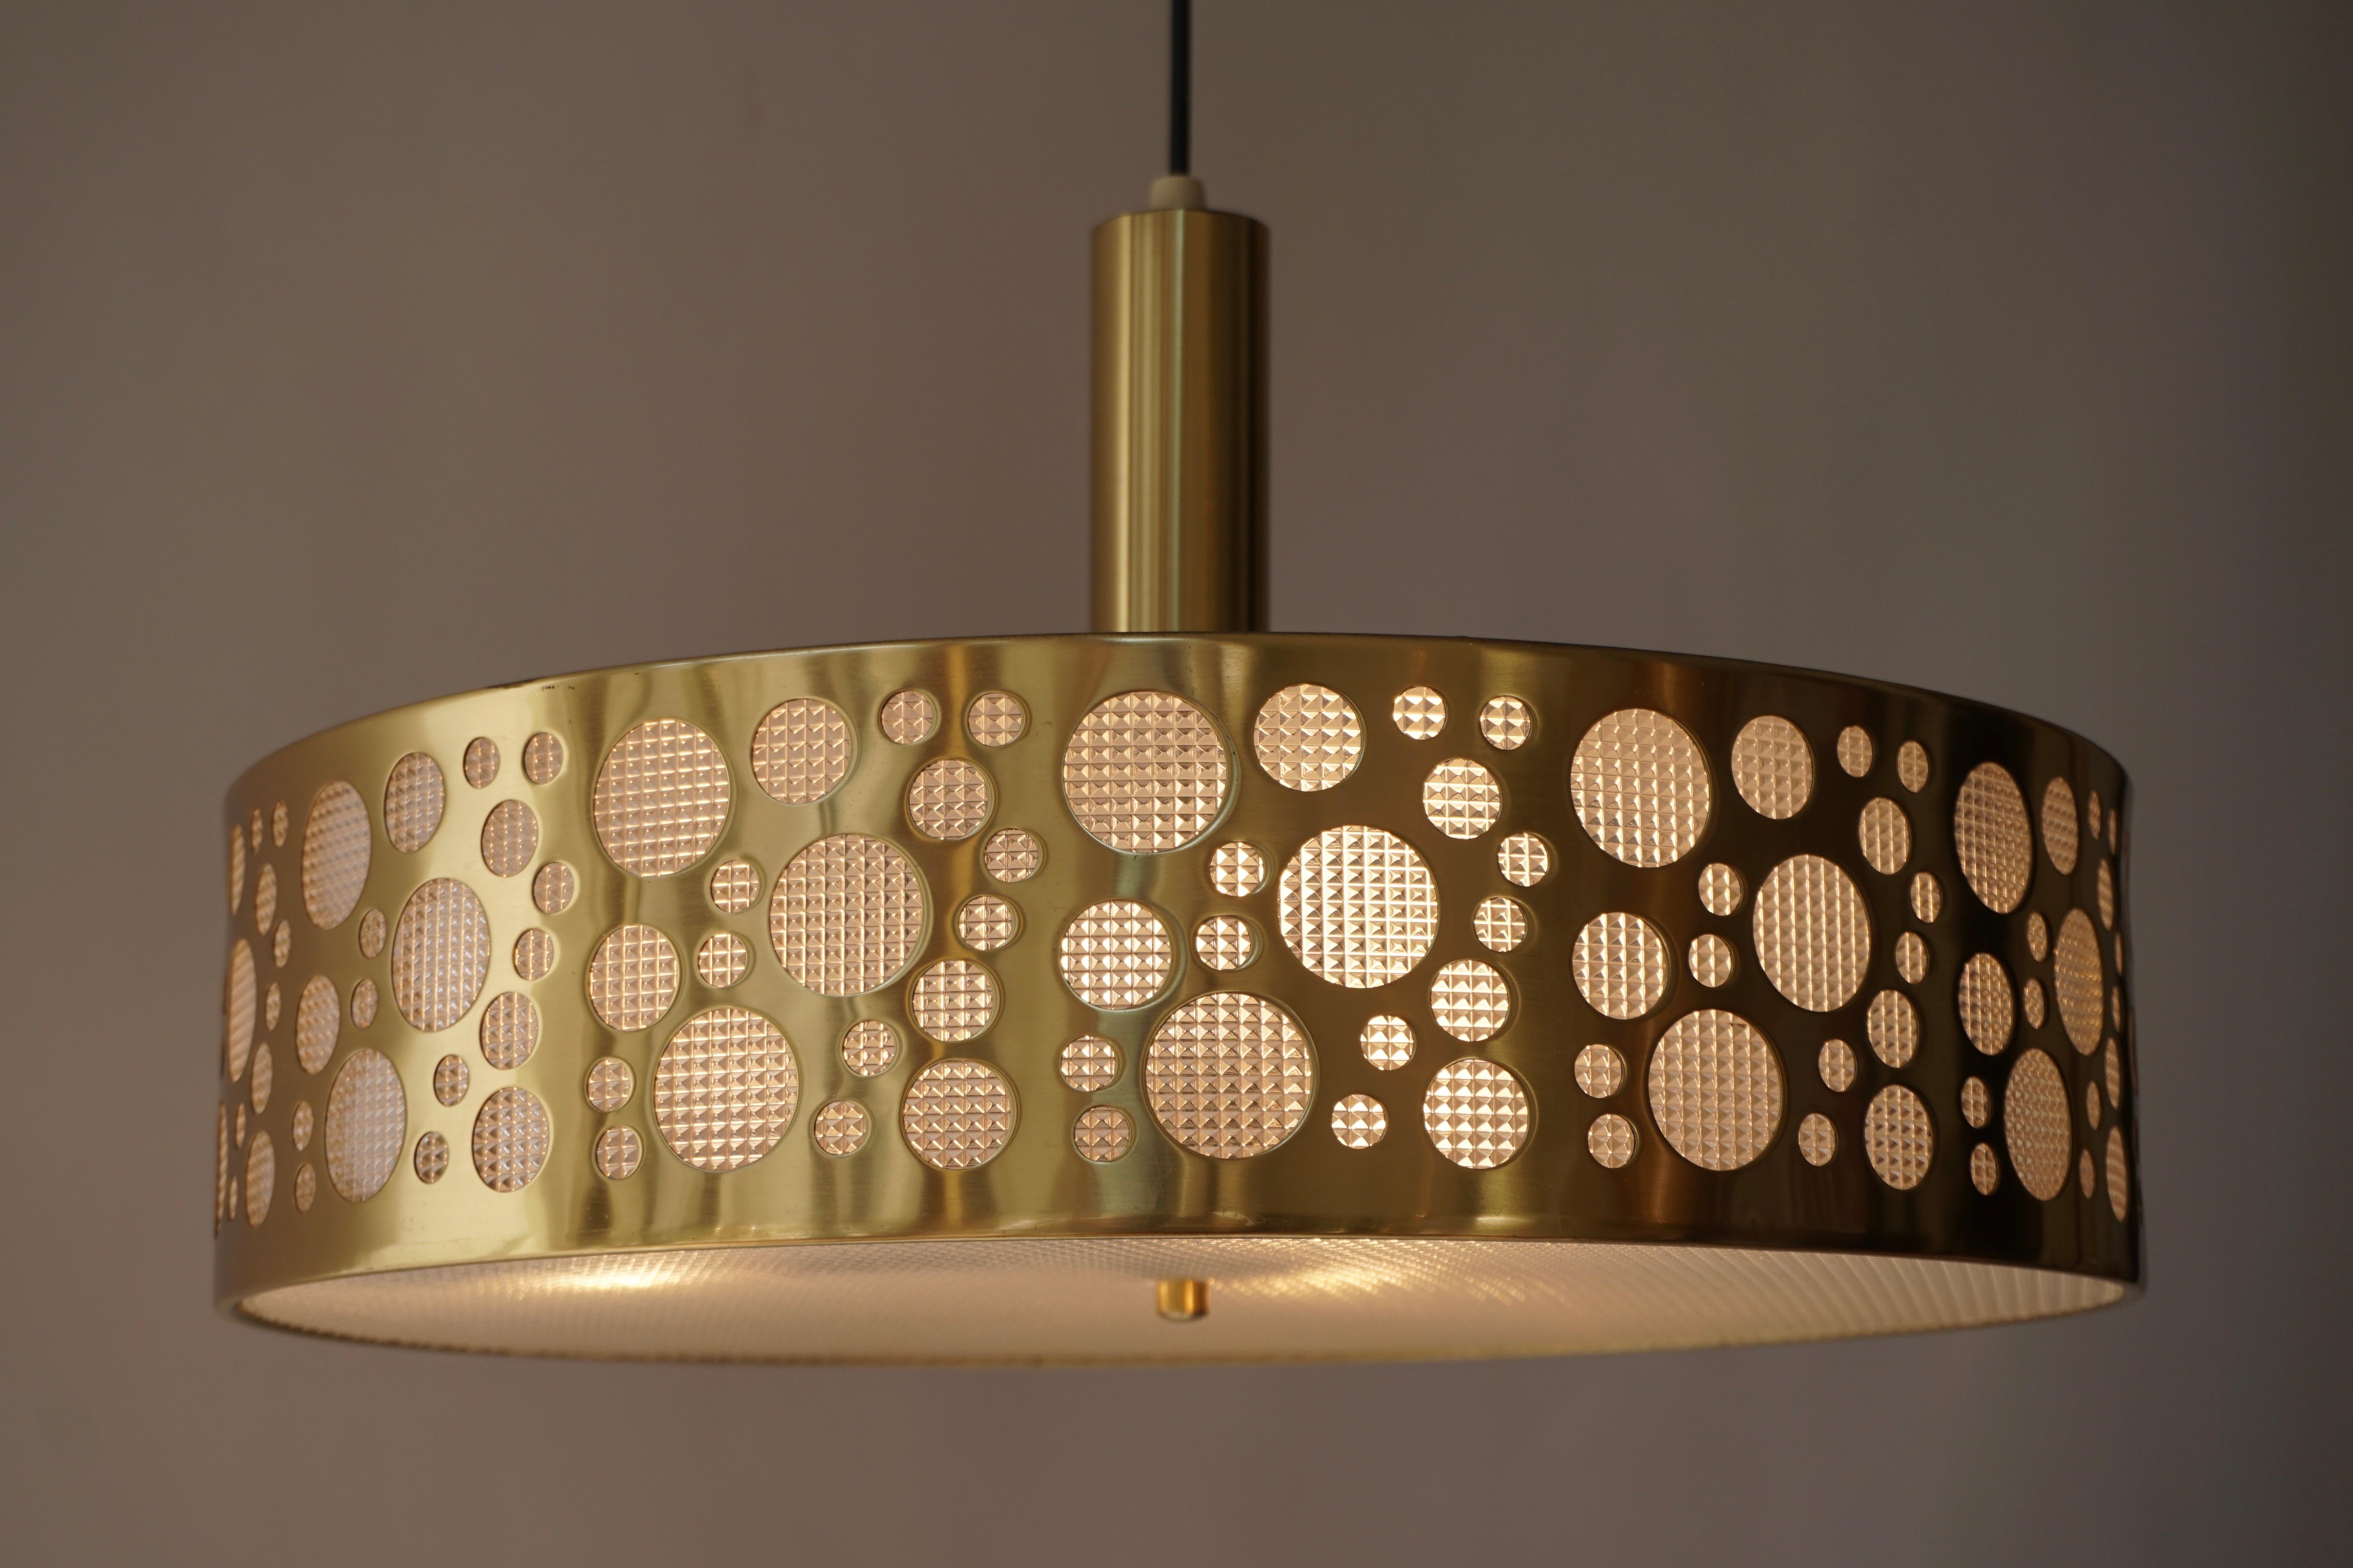 Mid-Century Modern brass 3-light chandelier, ceiling light, circa 1970. Shaped as an UFO or flying saucer, a popular topic during the 